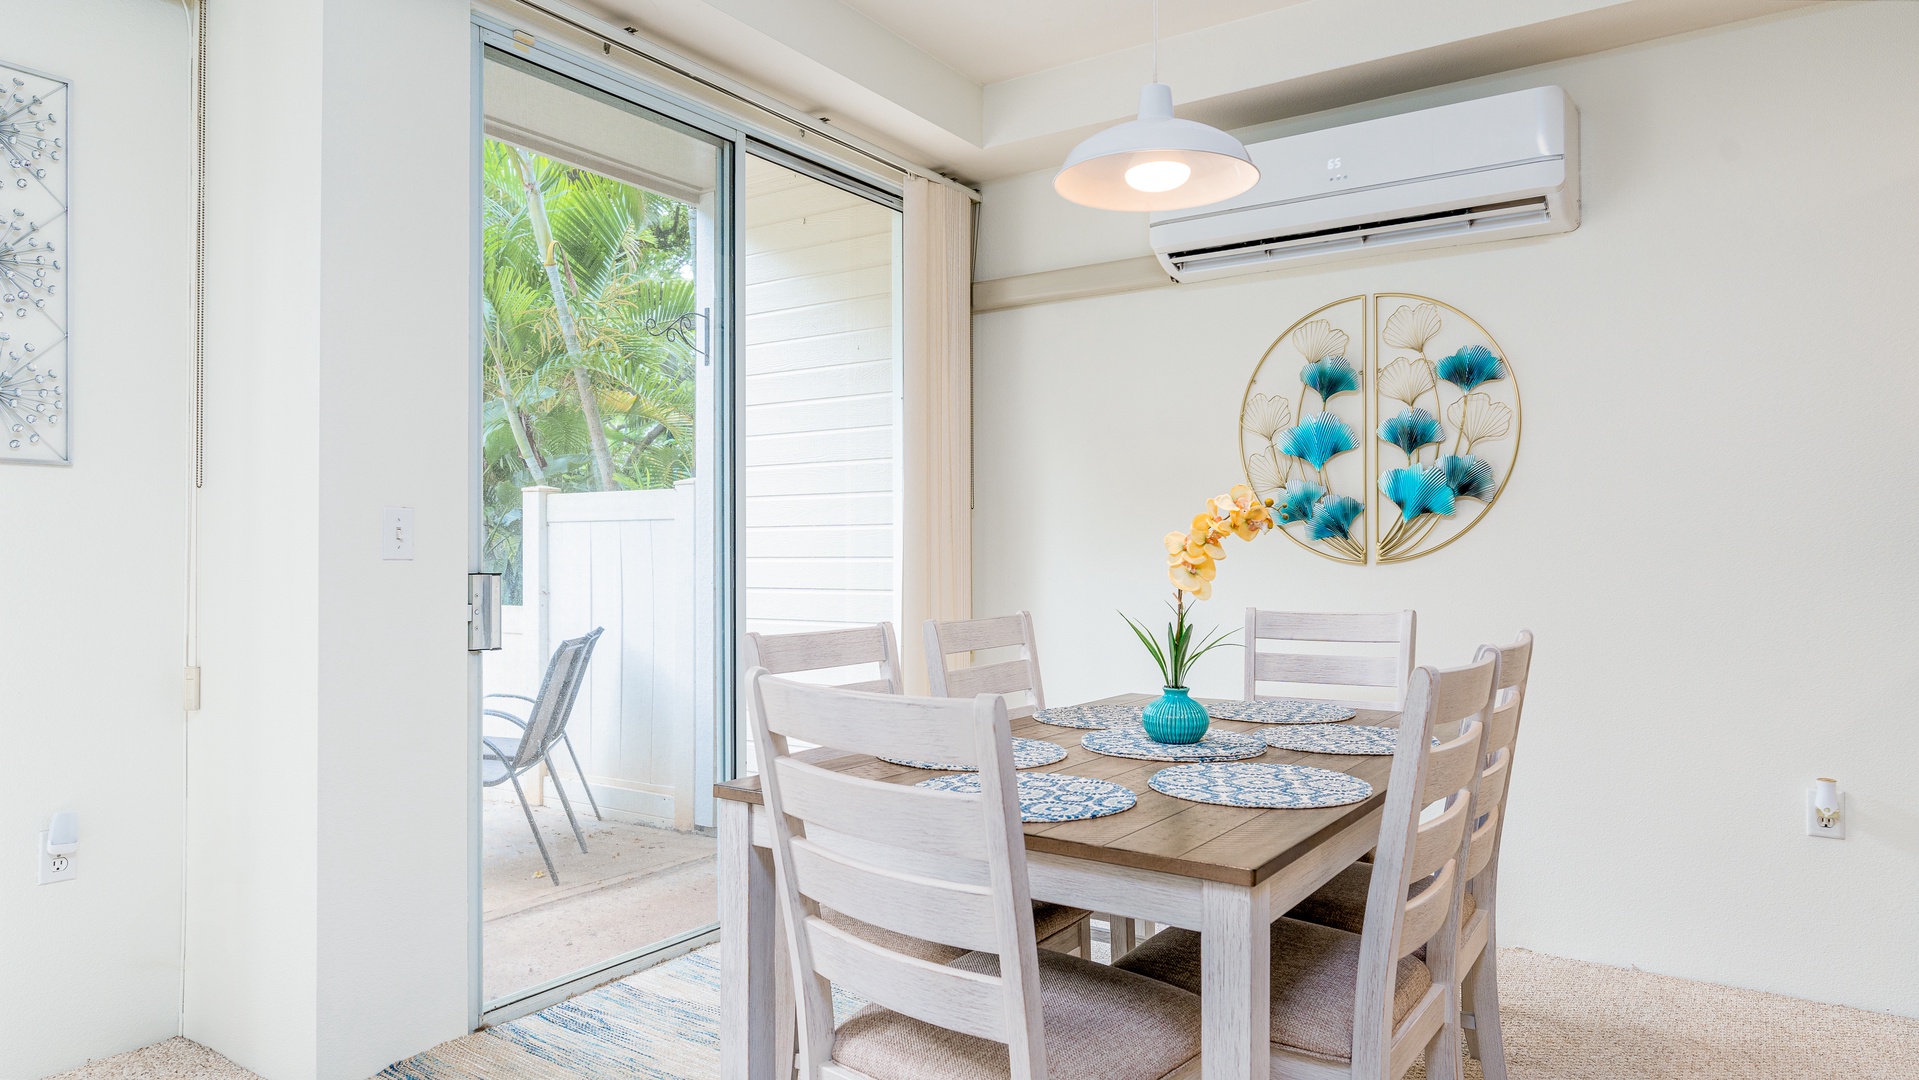 Kapolei Vacation Rentals, Fairways at Ko Olina 27H - With the indoor / outdoor living, the space feels bright and airy.